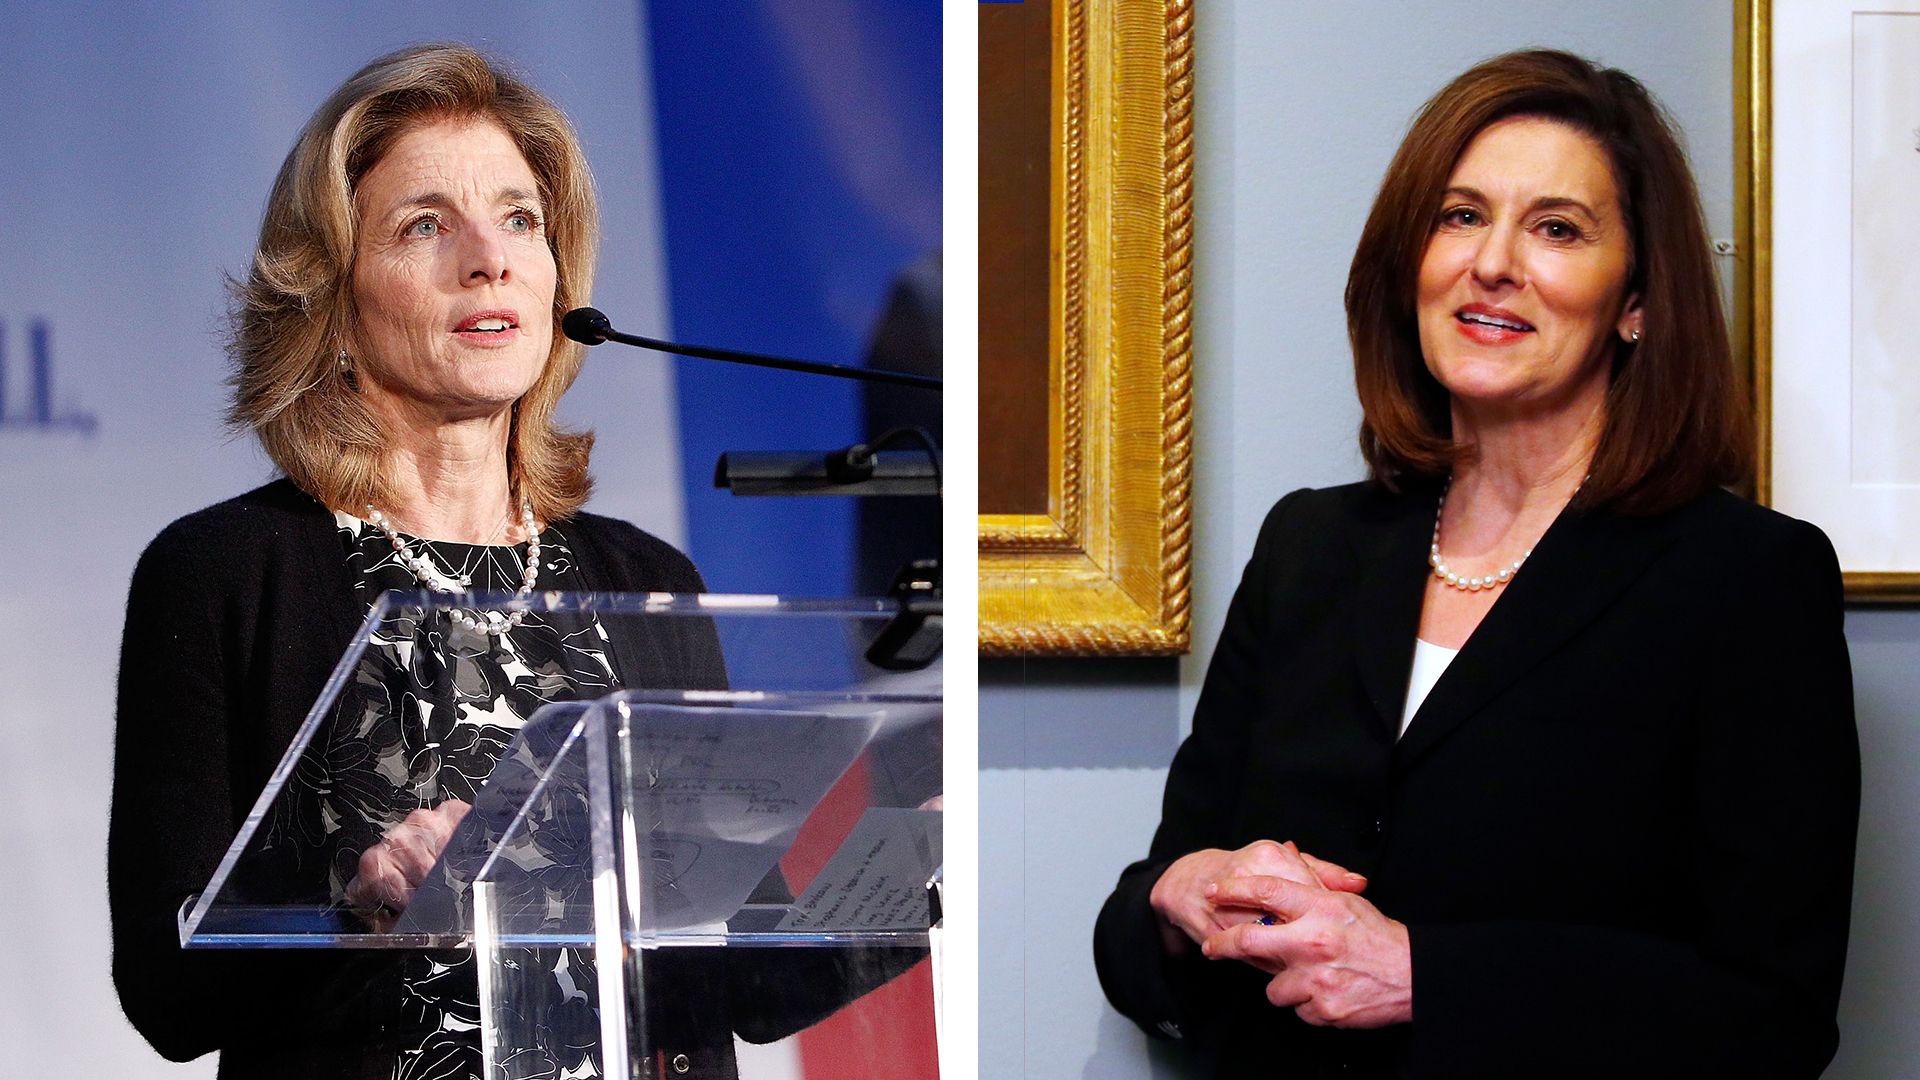 Caroline Kennedy and Vicki Kennedy and pictured in side by side photos